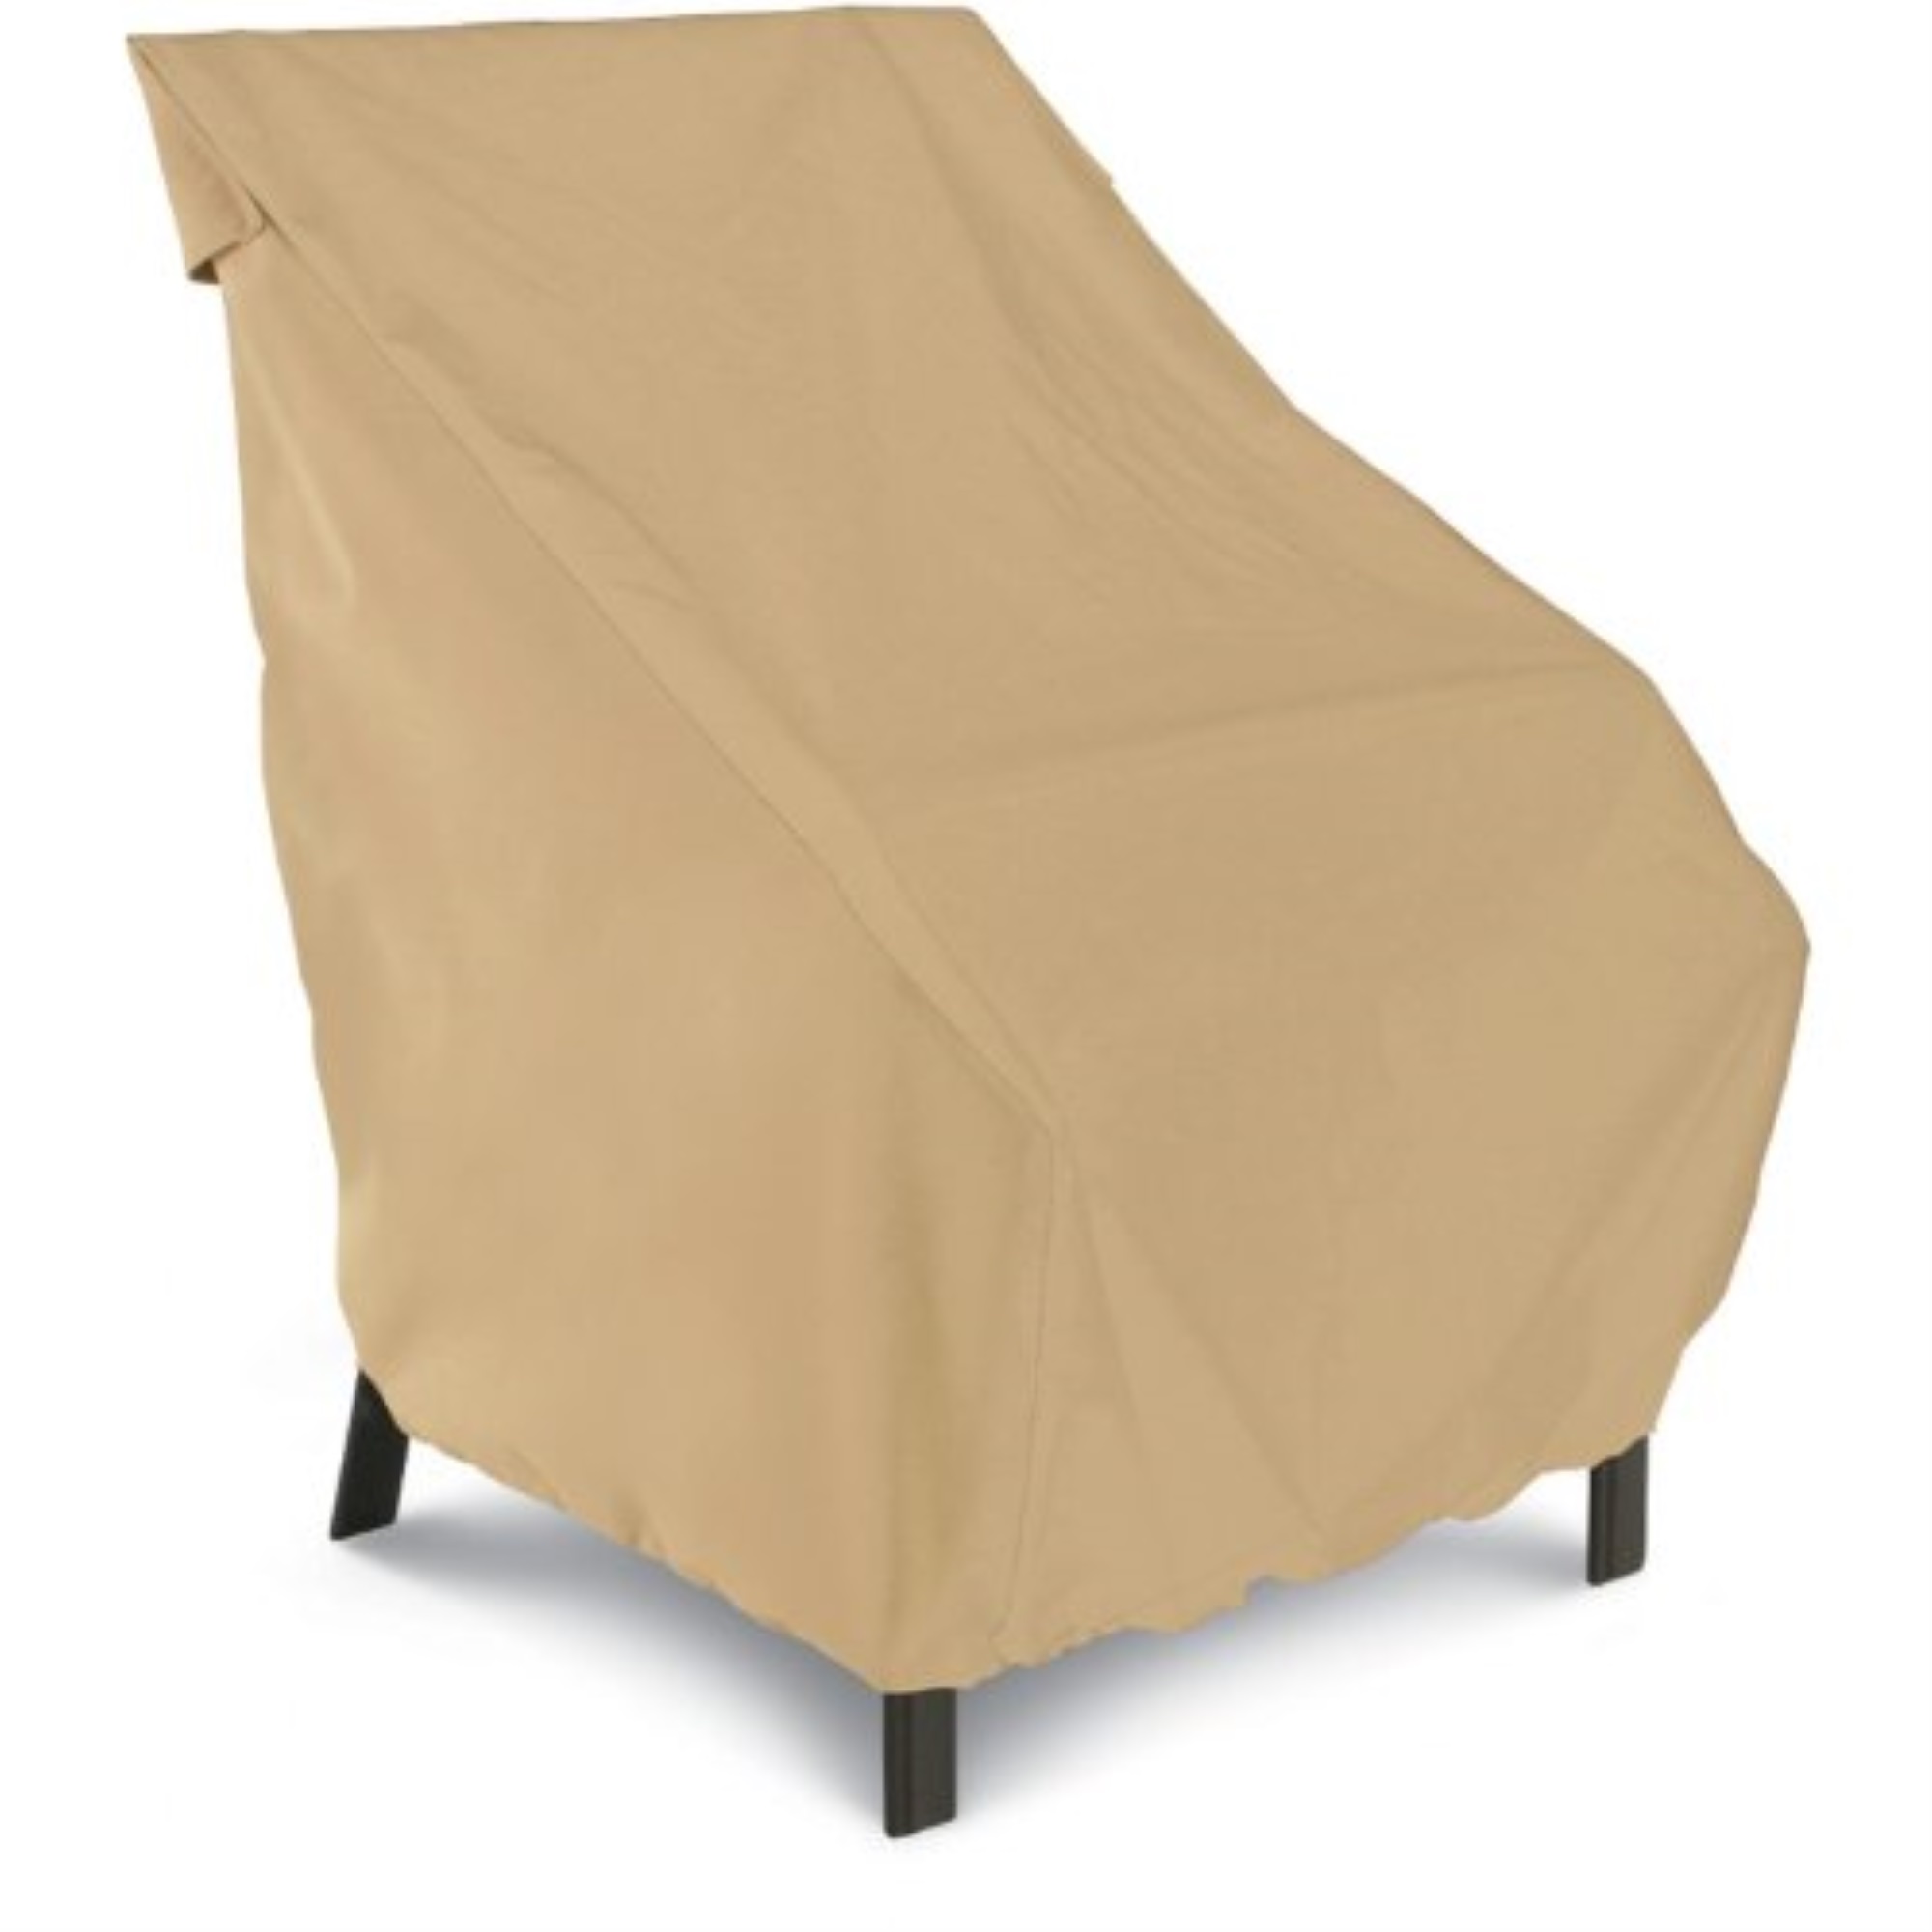 Classic Accessories 8013266 CHAIR CVR TERRAZZO STAND Classic Accessories Terrazzo 26 in. H X 25.5 in. W X 28.5 in. L Beige Polyester Chair Cover